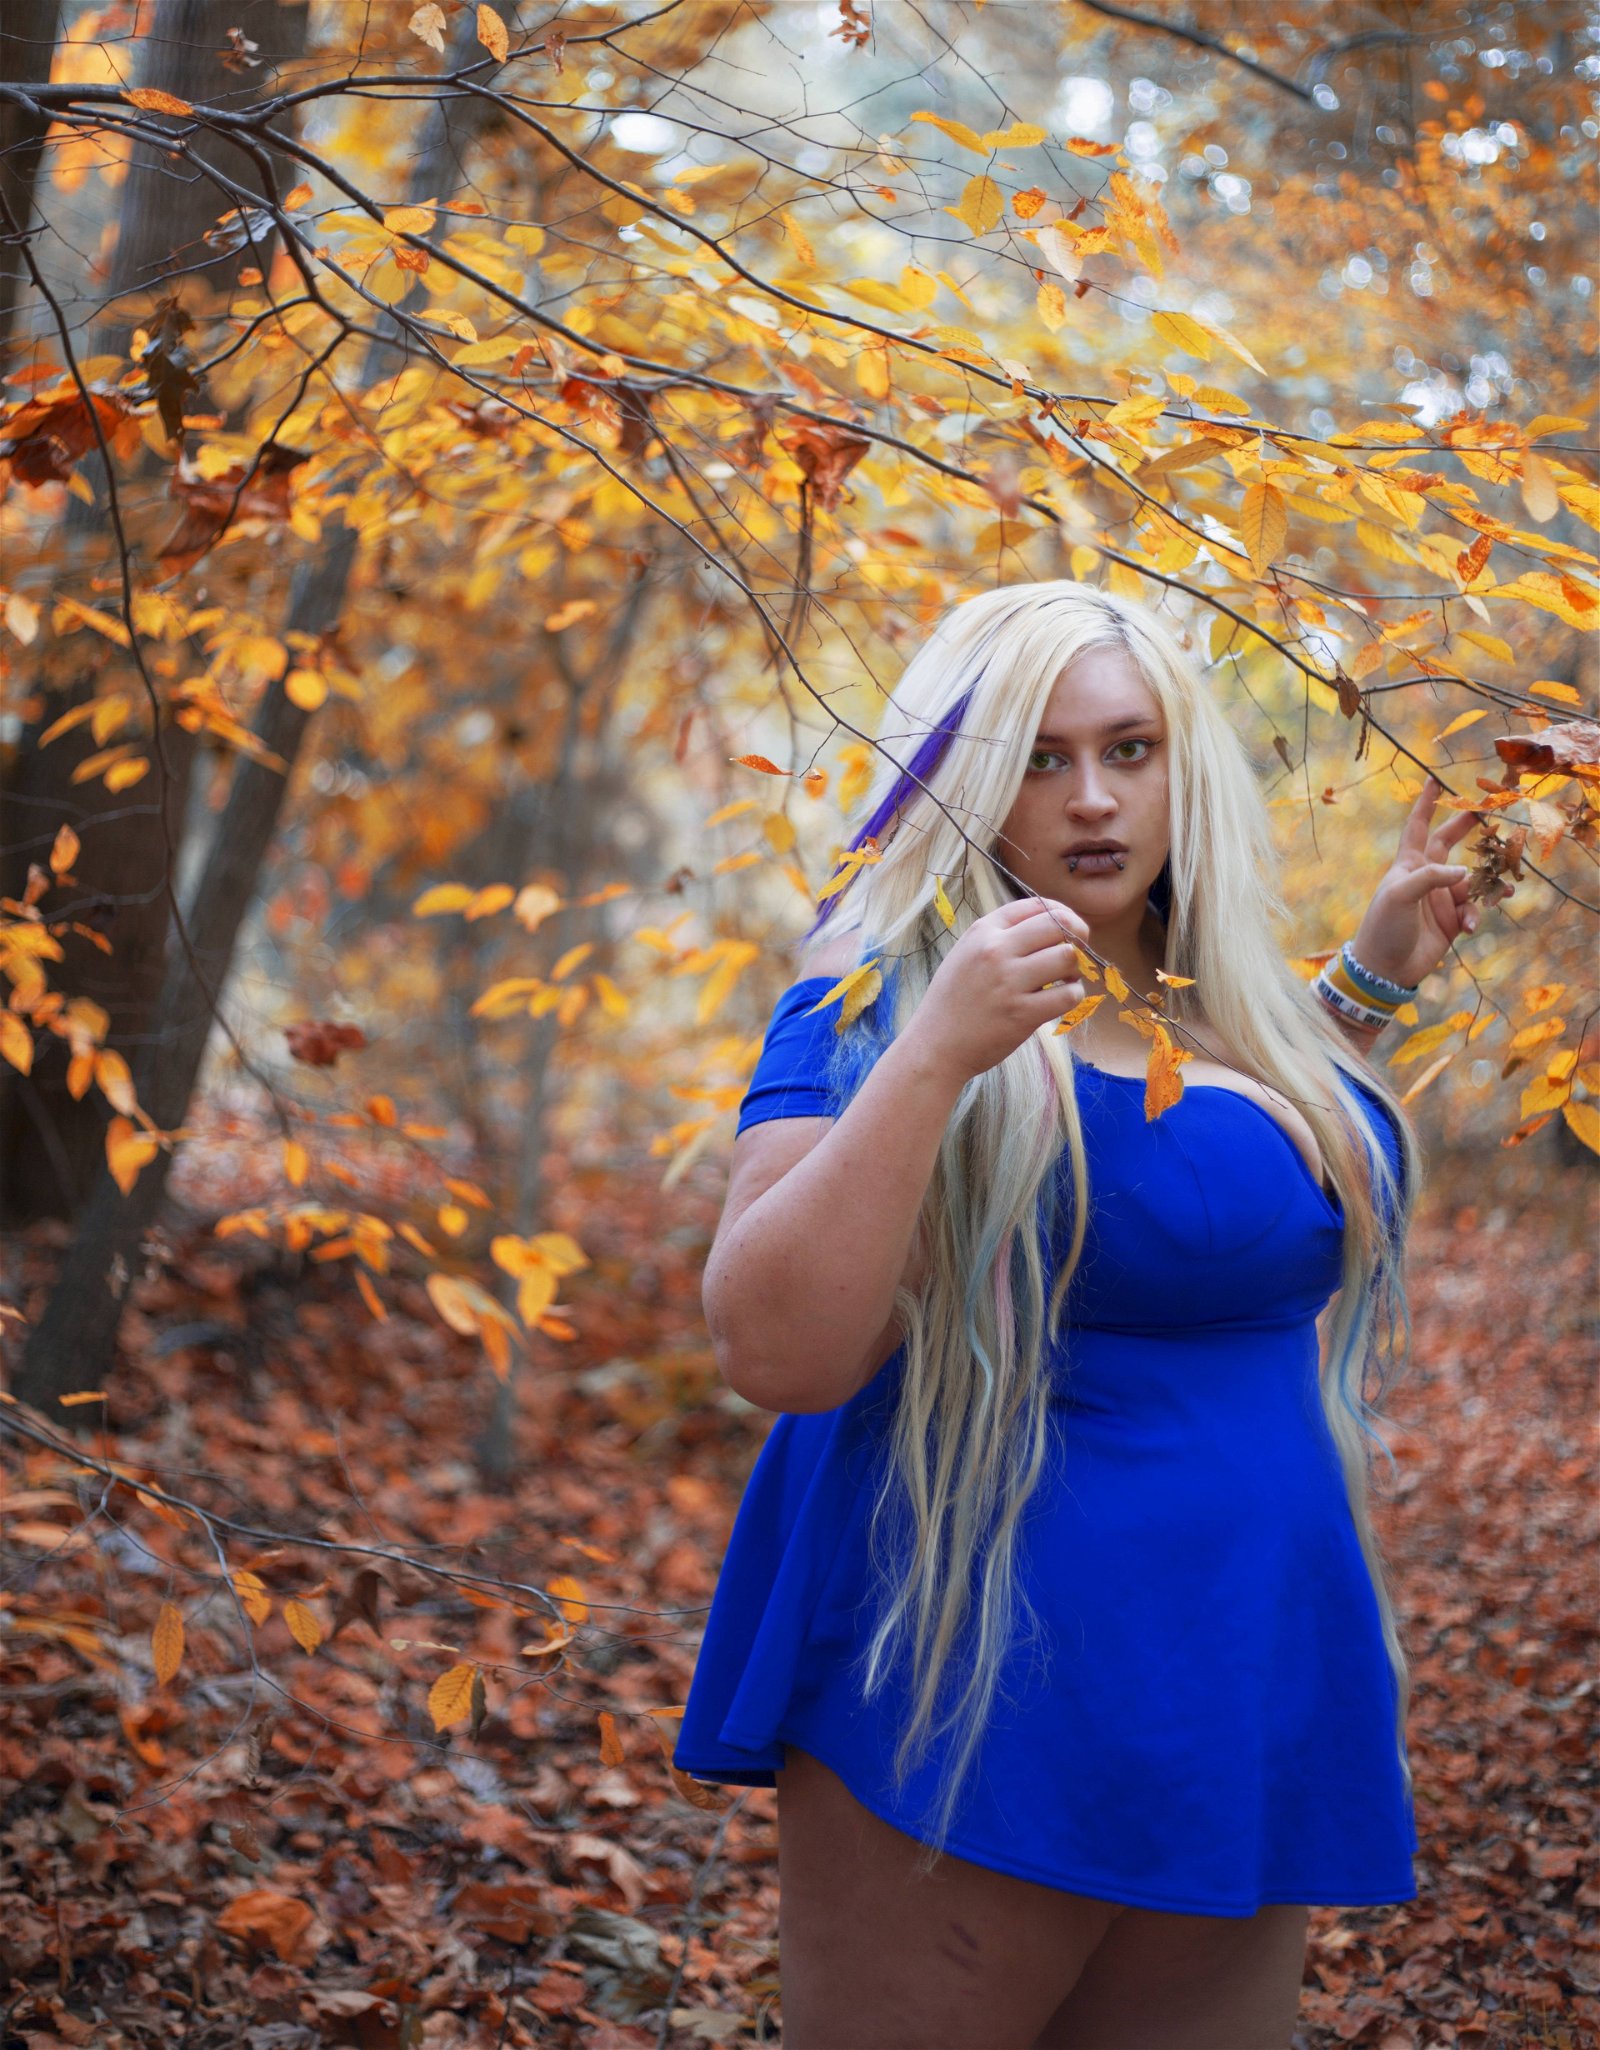 Photo by Cheesecakes with the username @Cheesecakes, who is a verified user,  December 17, 2018 at 8:58 PM. The post is about the topic Phone sex chat and the text says 'A modeling photo. #thick #plussize #bbw #longhair #Blonde #photography'